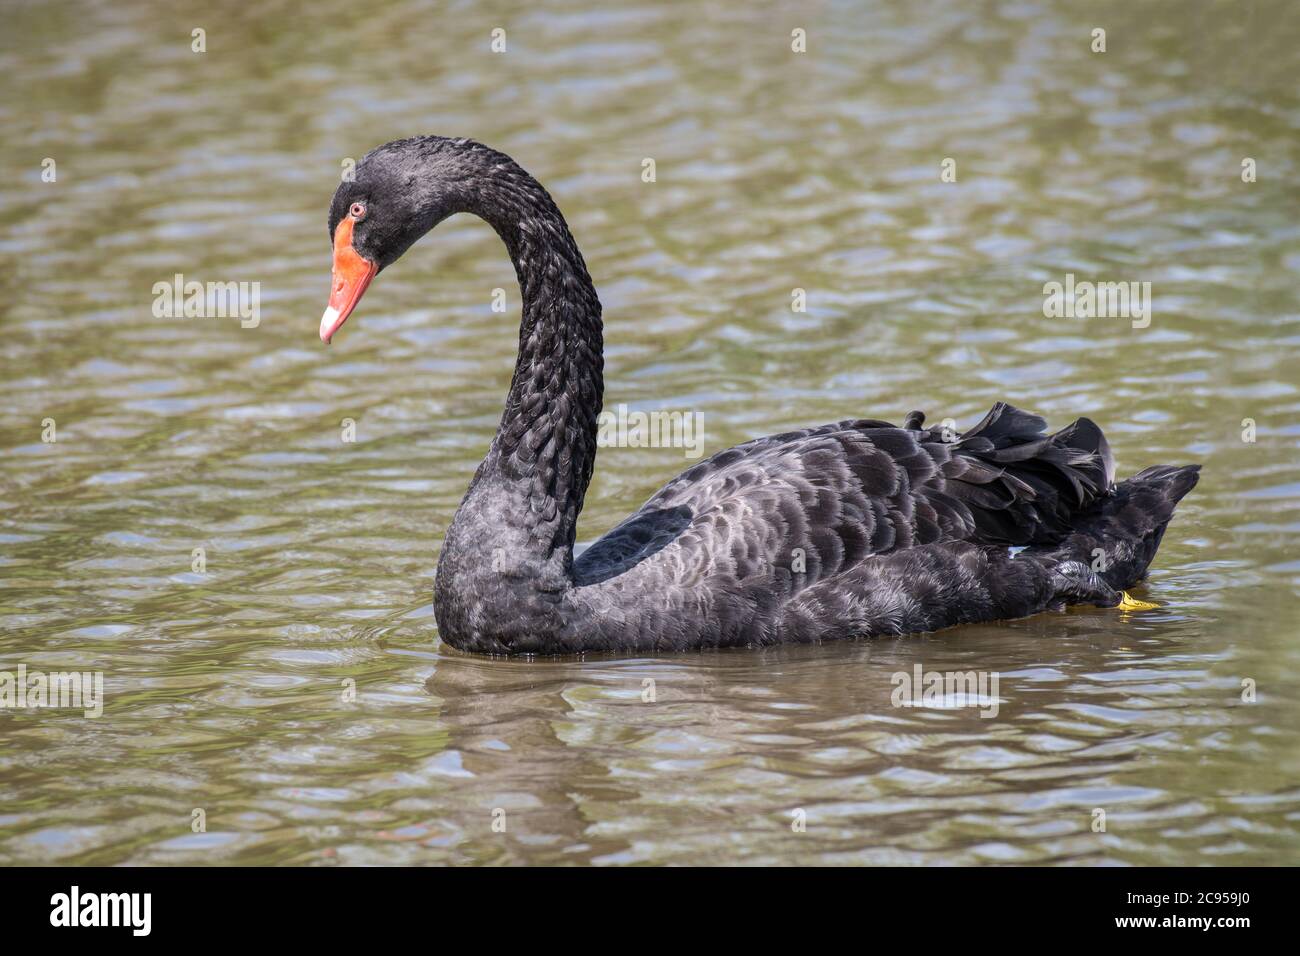 Close up of a black swan, Cygnus atratus, swimming on the water with its head slightly looking down Stock Photo